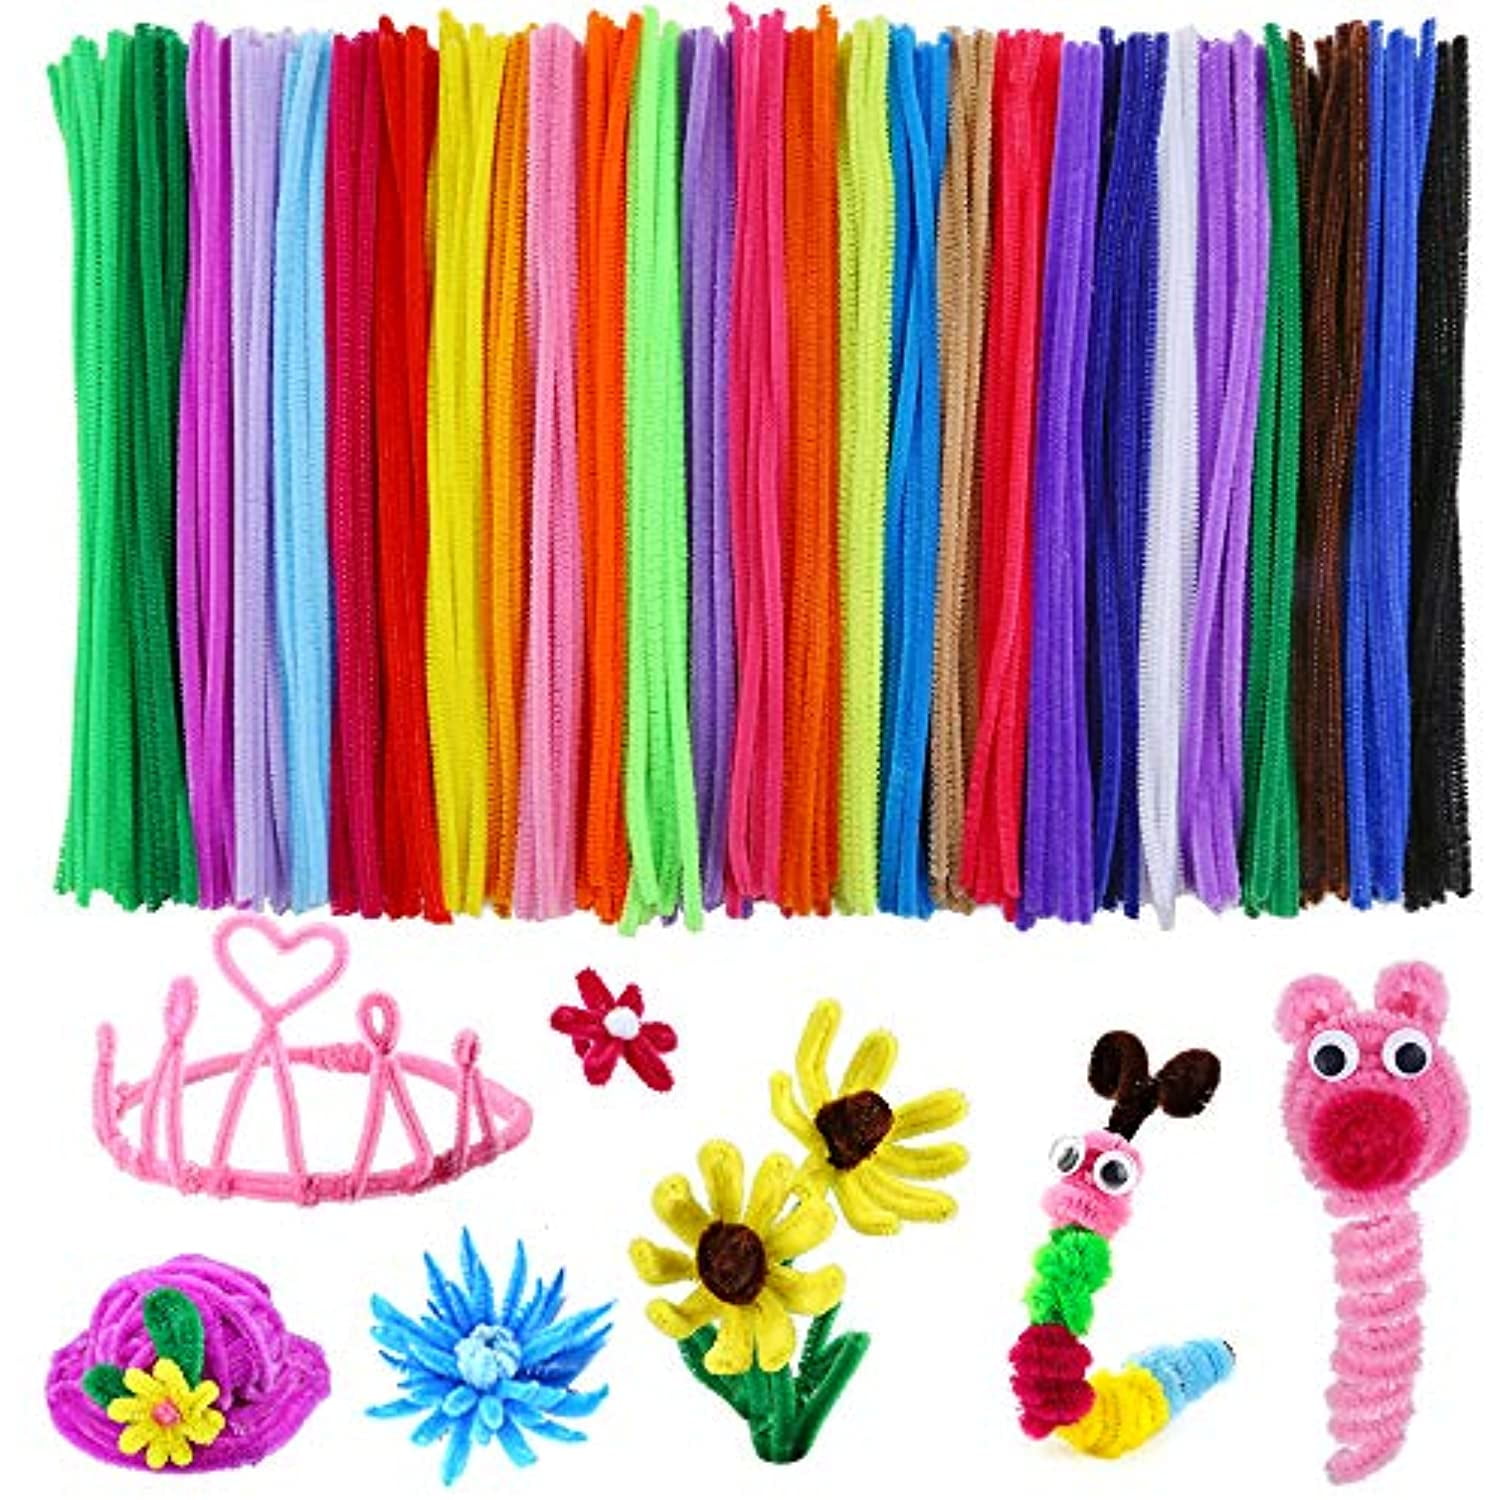 Caydo 200 Pieces Brown Pipe Cleaners Craft Chenille Stems for DIY Art Creative Crafts Decorations Brown 12 Inch x 6 mm 